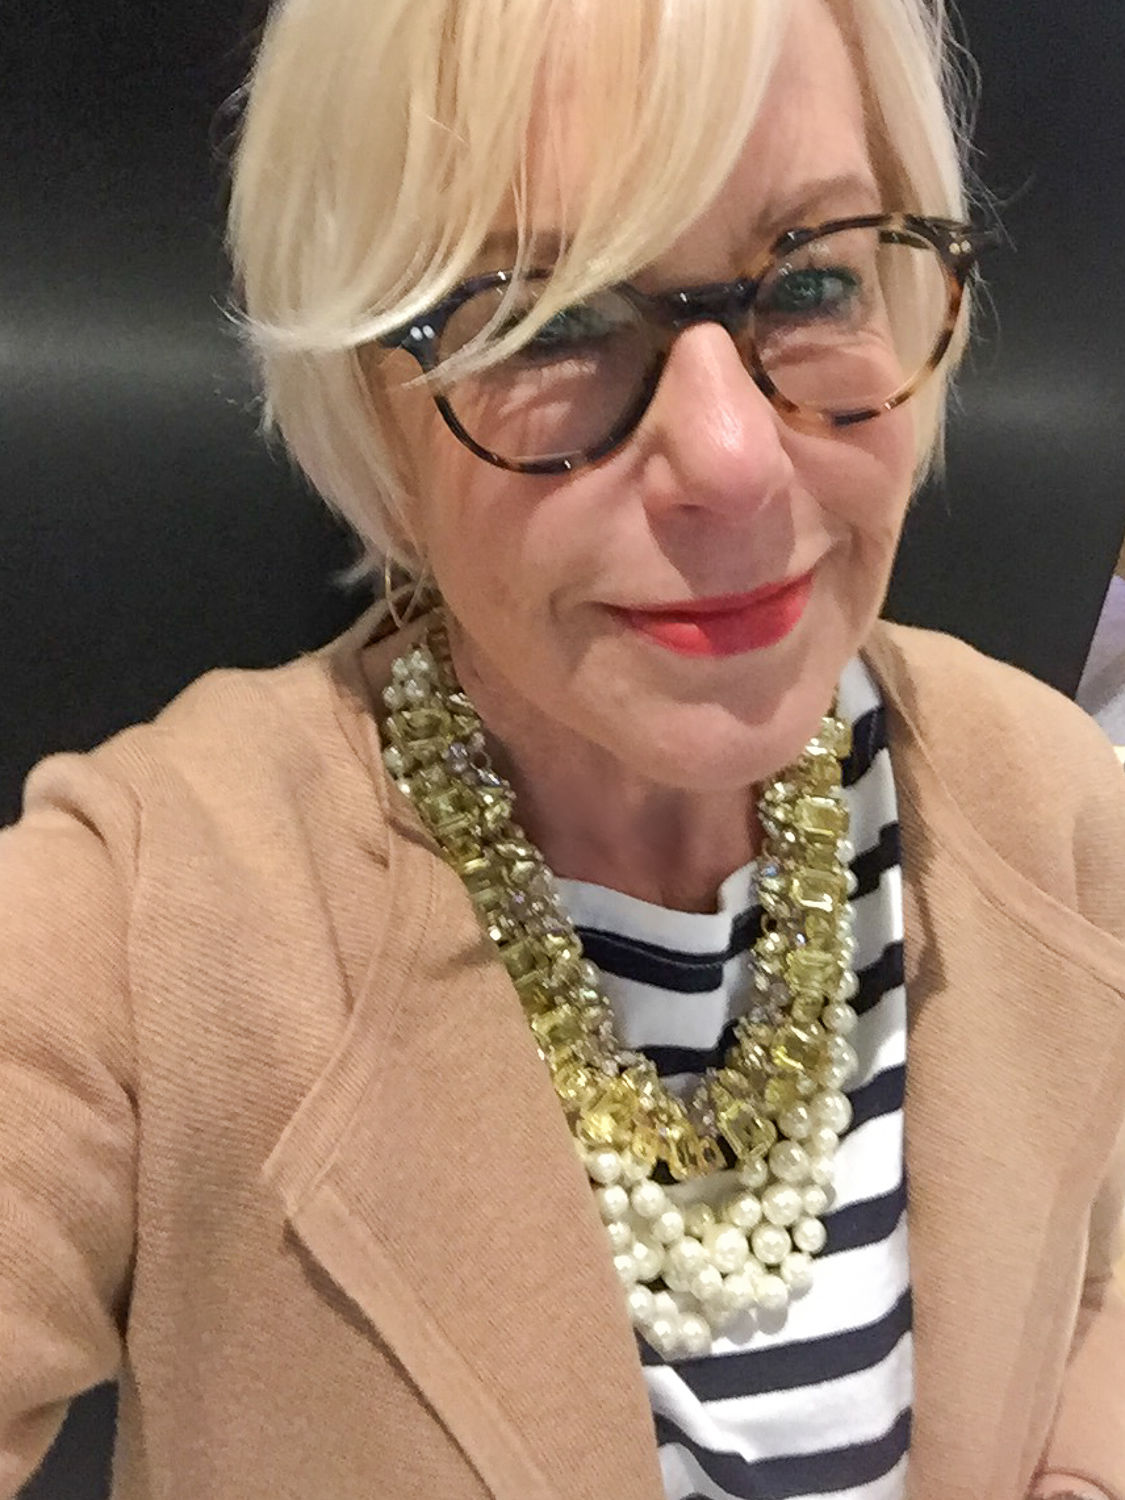 Style blogger Susan B. wears layered necklaces and striped tee from J.Crew. Details at une femme d'un certain age.